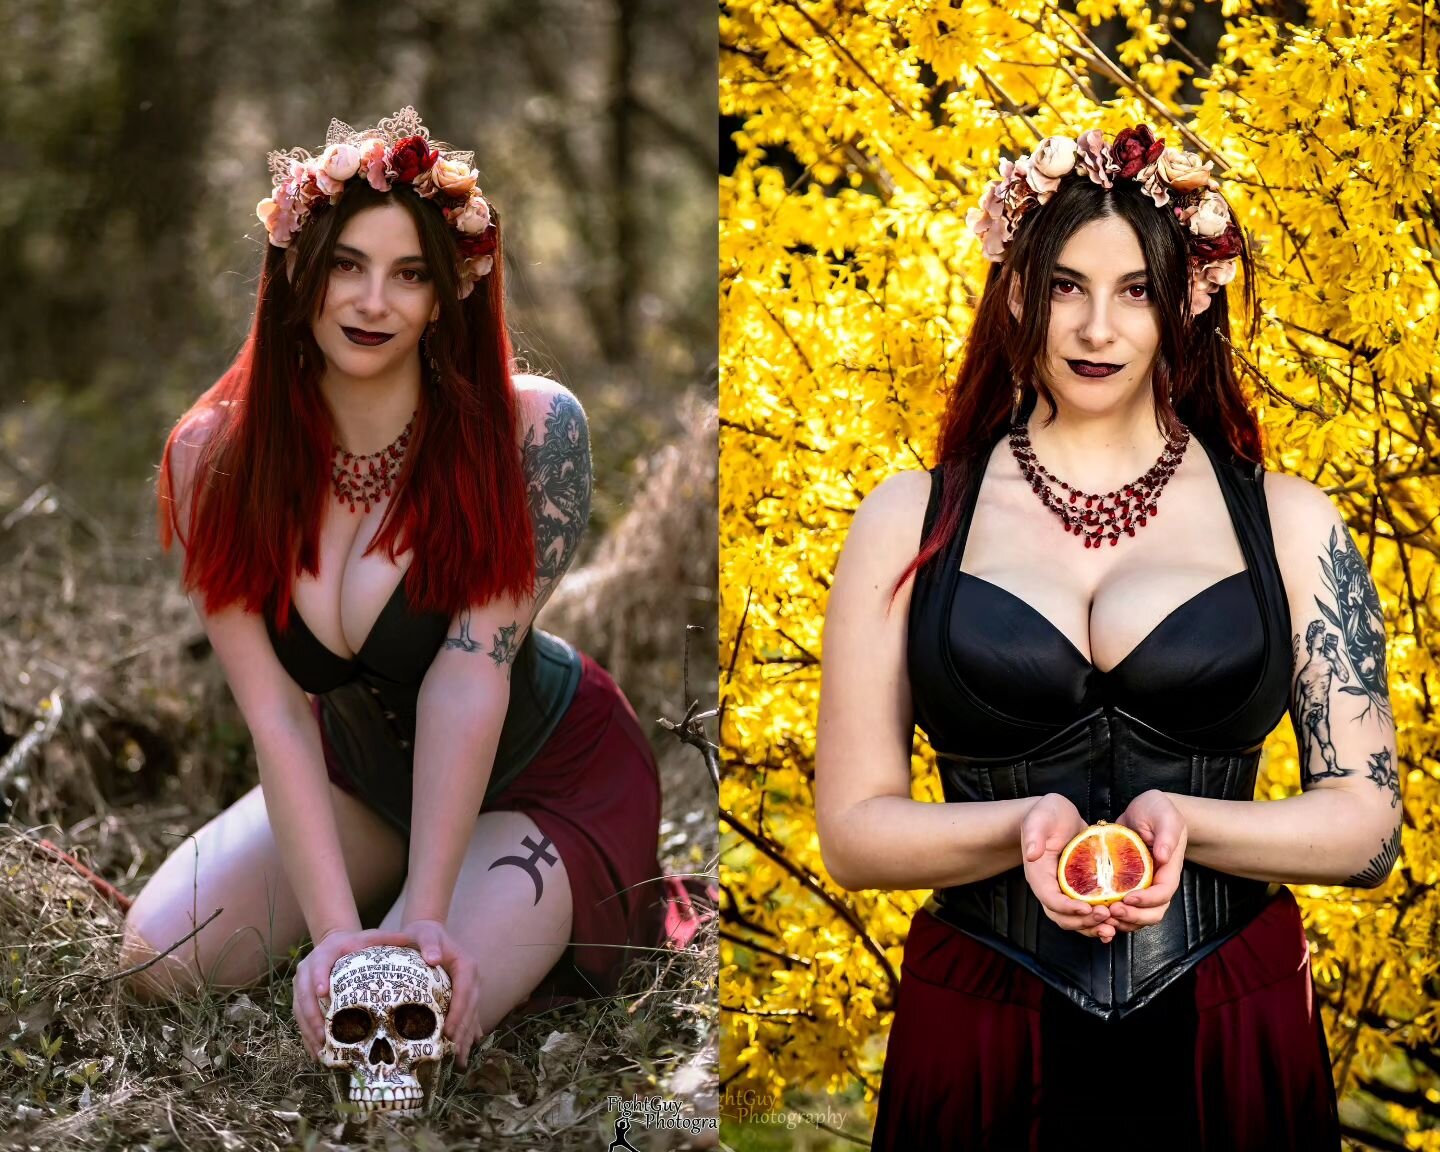 #Throwback to last year this month when we did our #Persephone shoot with our beautiful friend, Rachel! 💀 💐